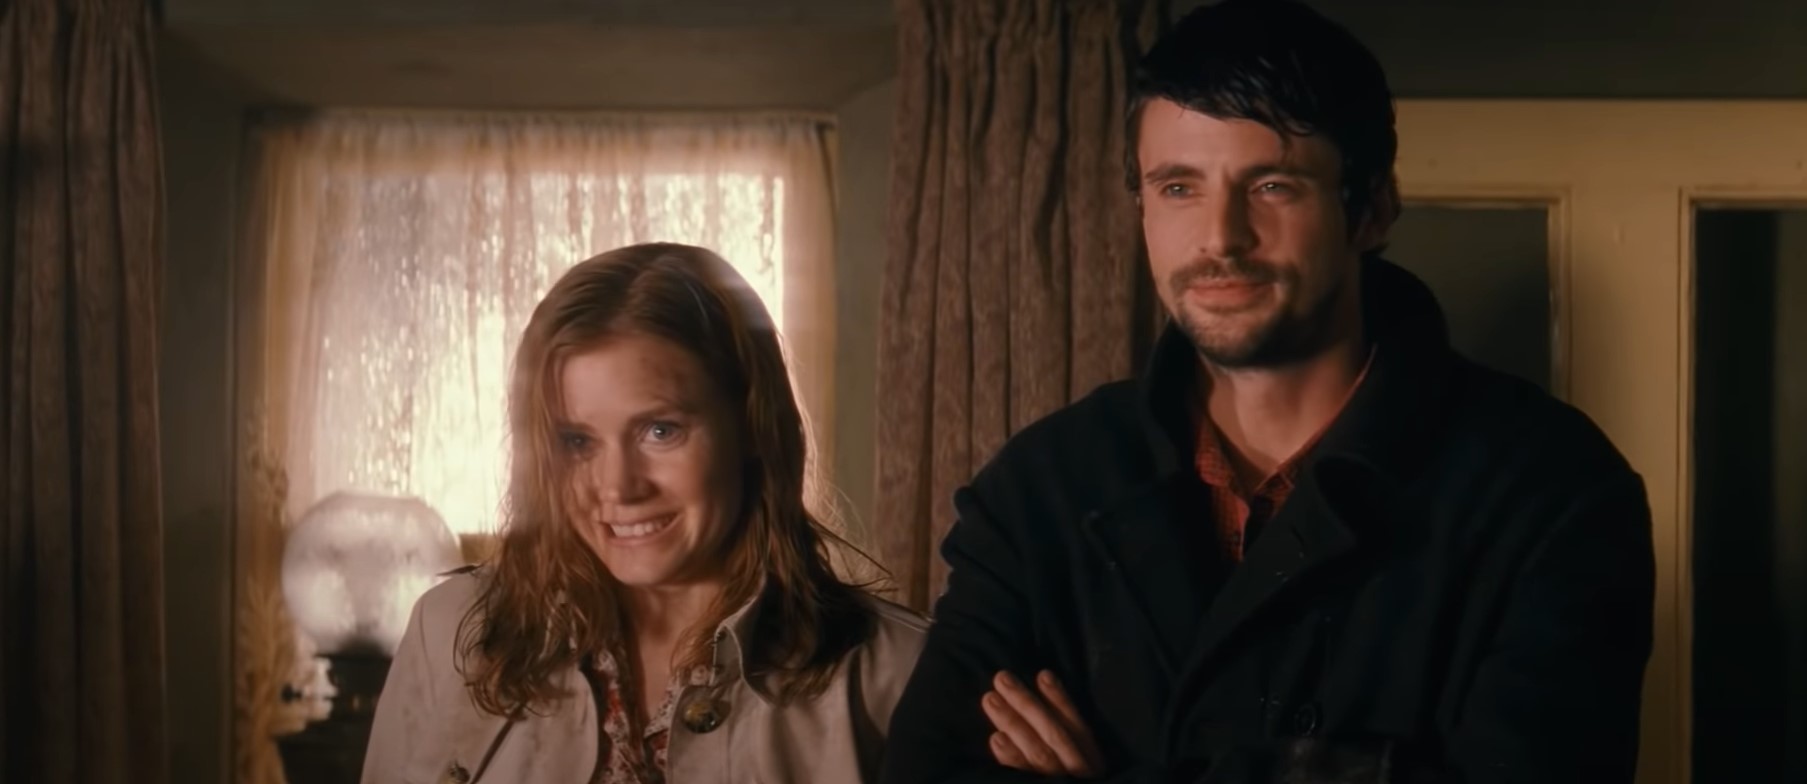 Loved Leap Year? Here Are 8 Movies You Will Also Like